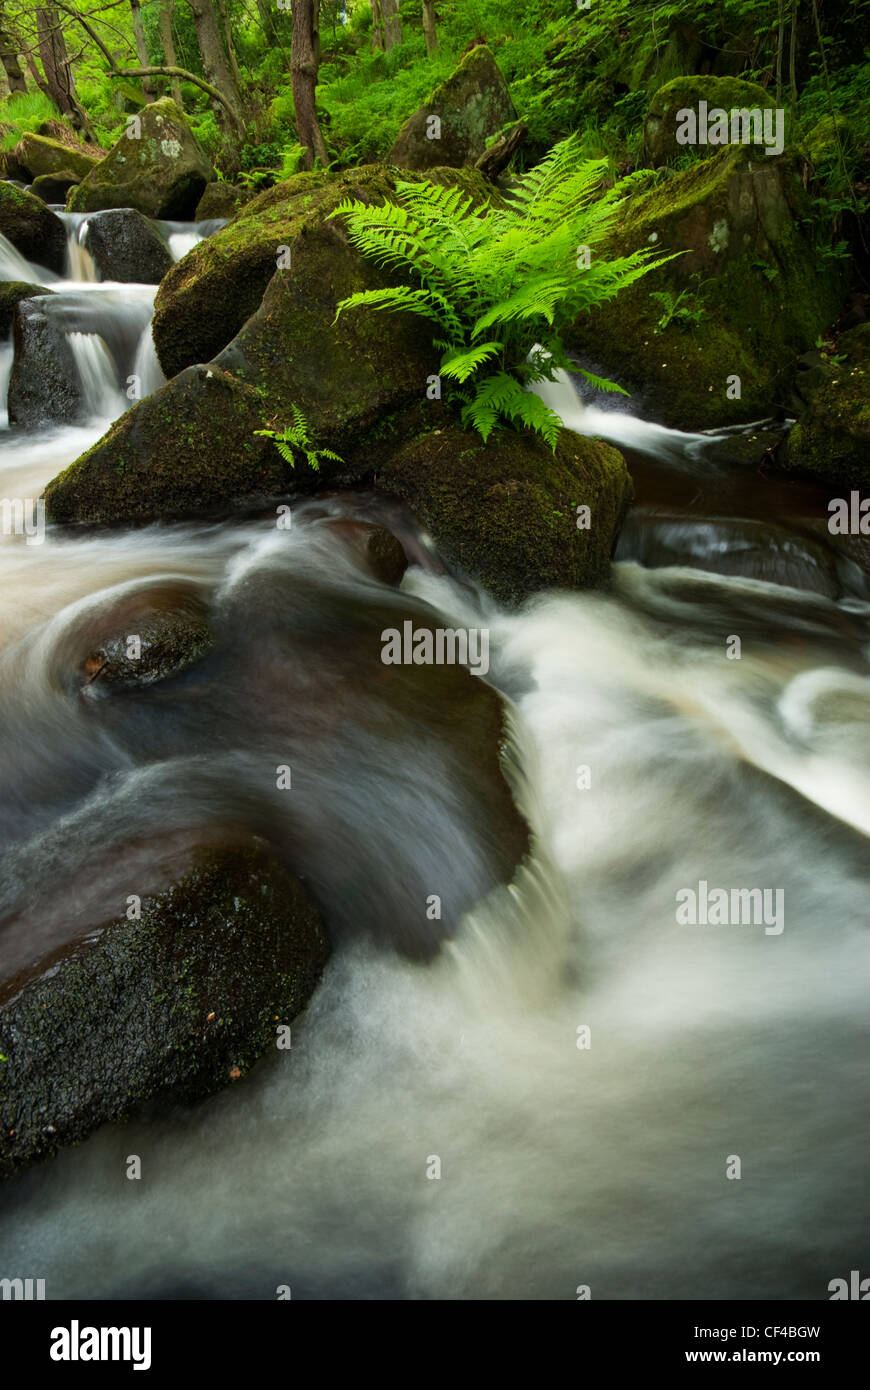 A fern nestled in a rock along a stream in Padley Gorge Stock Photo